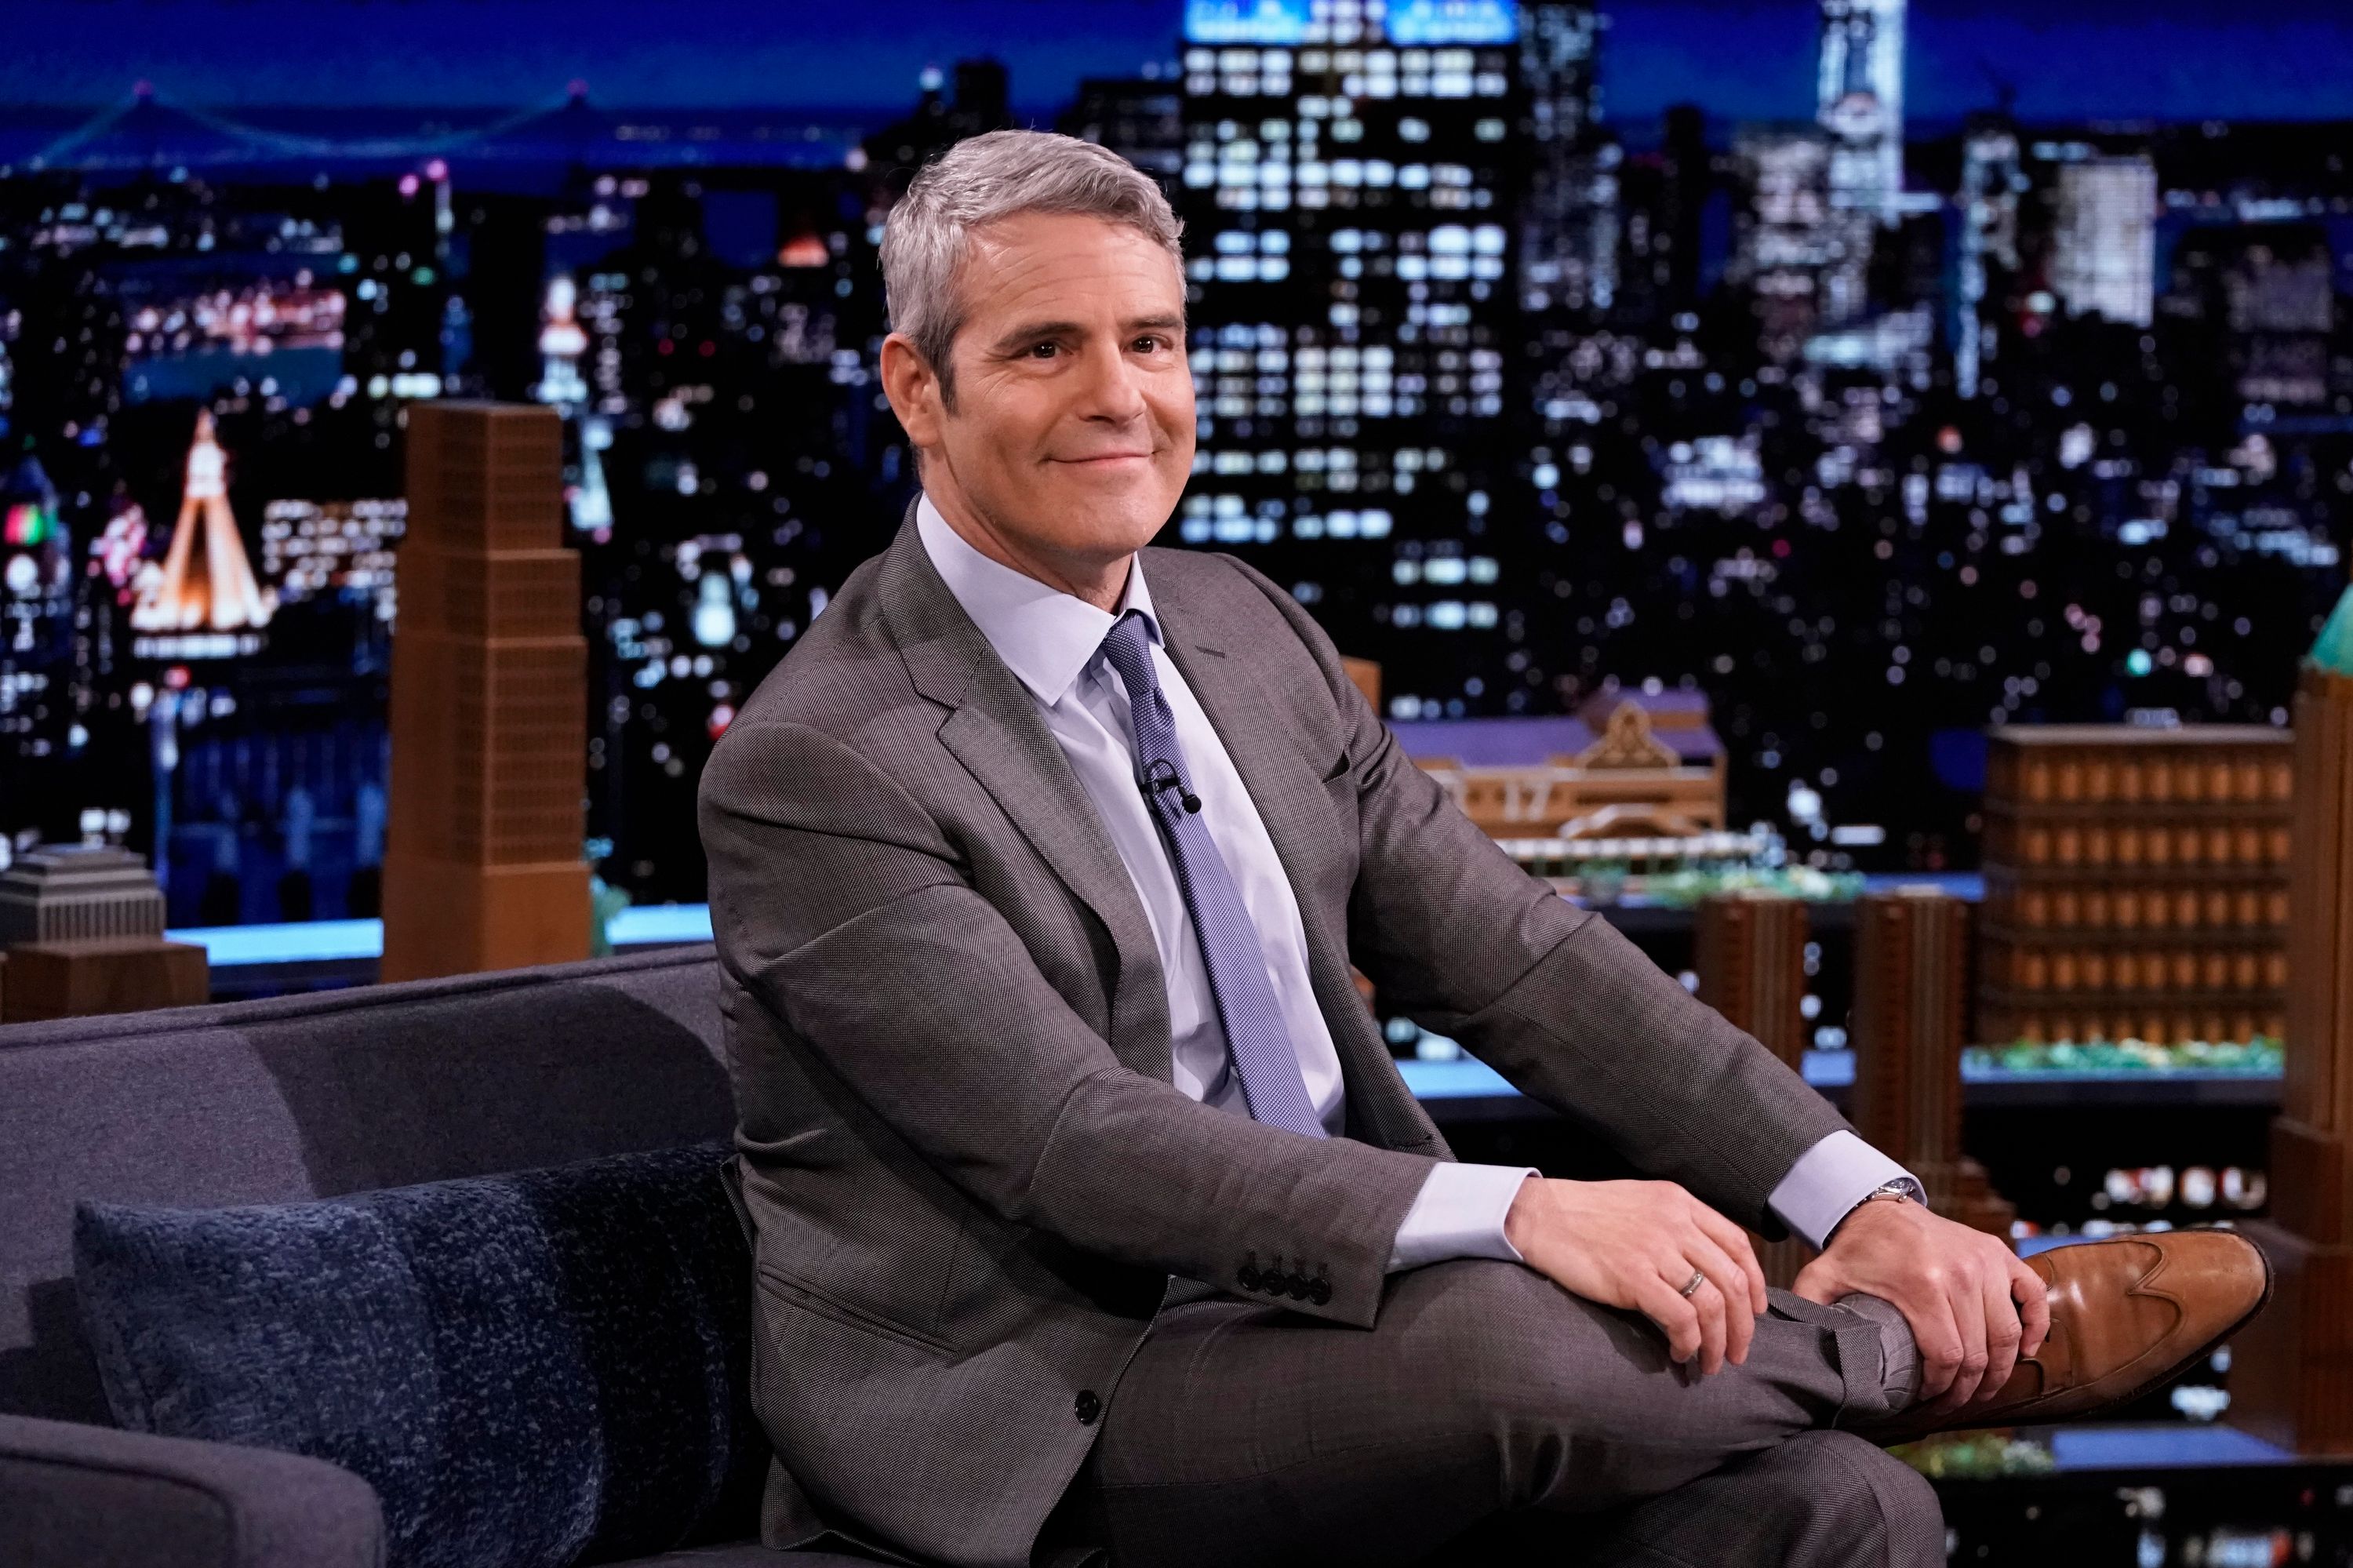 Andy Cohen during an interview on "The Tonight Show Starring Jimmy Fallon" on March 22, 2021 | Photo: Andrew Lipovsky/NBC/NBCU Photo Bank/Getty Images